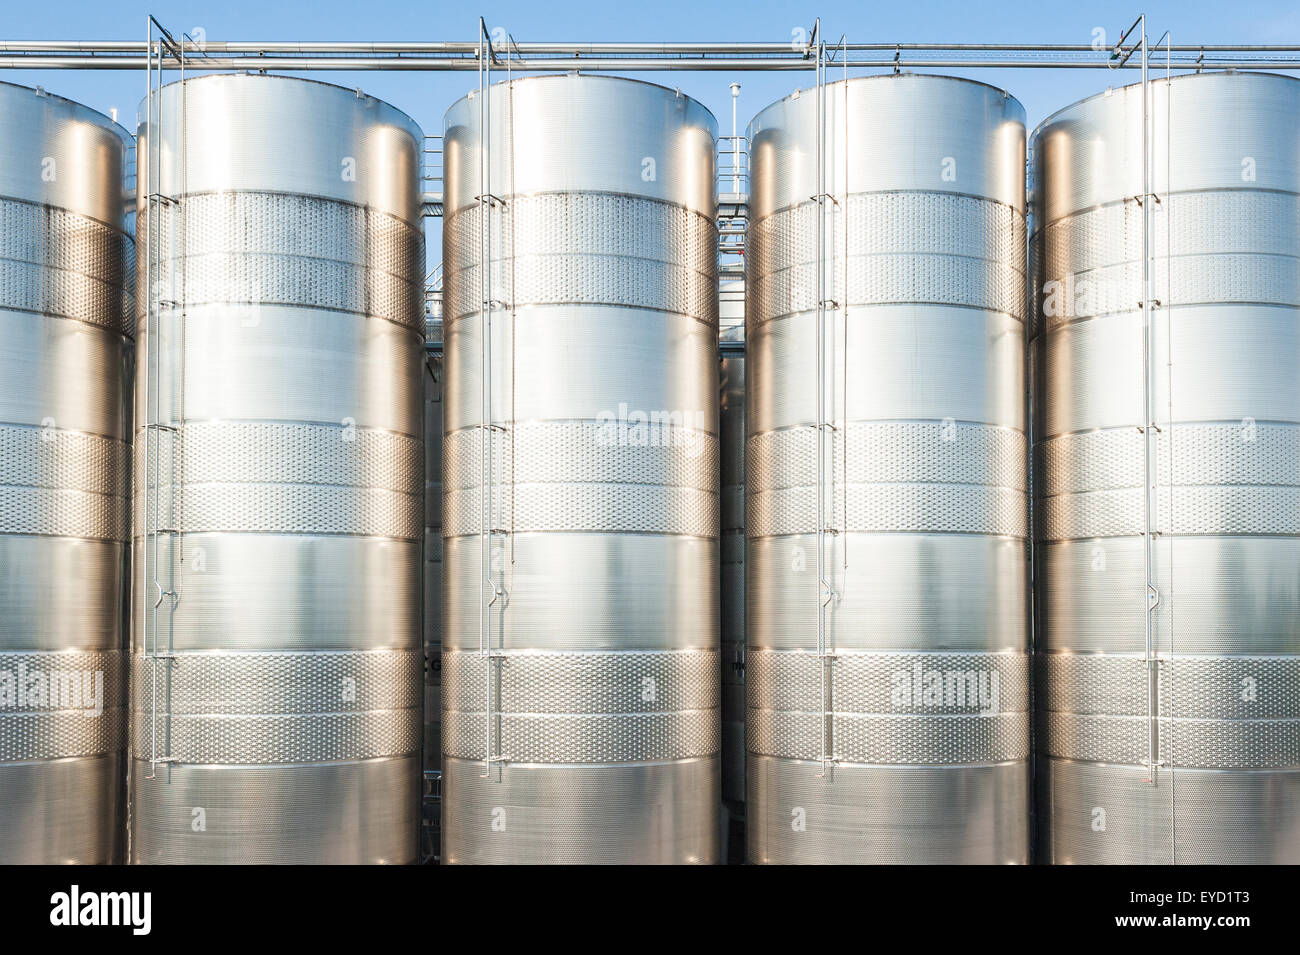 Series of stainless steel containers for wine Stock Photo